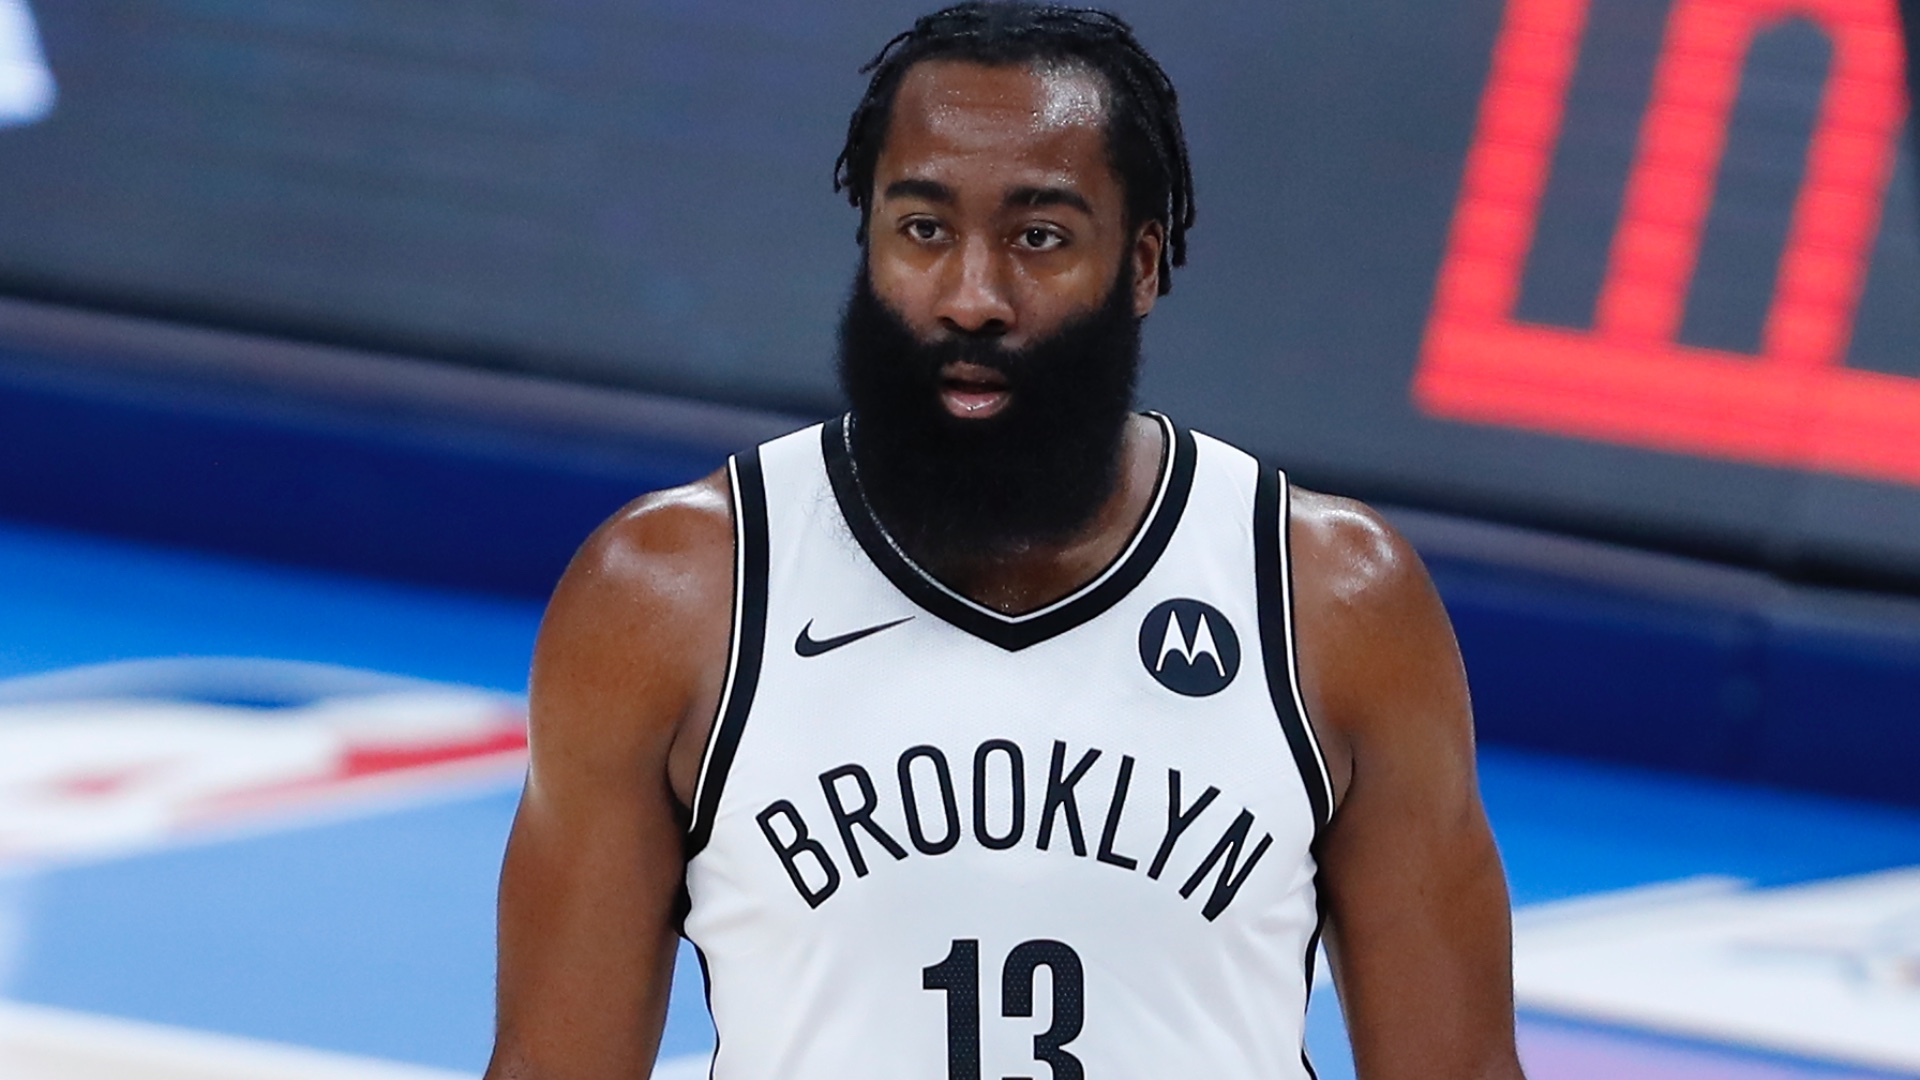 Report: James Harden Ruled Out Against Wizards With Thigh Contusion